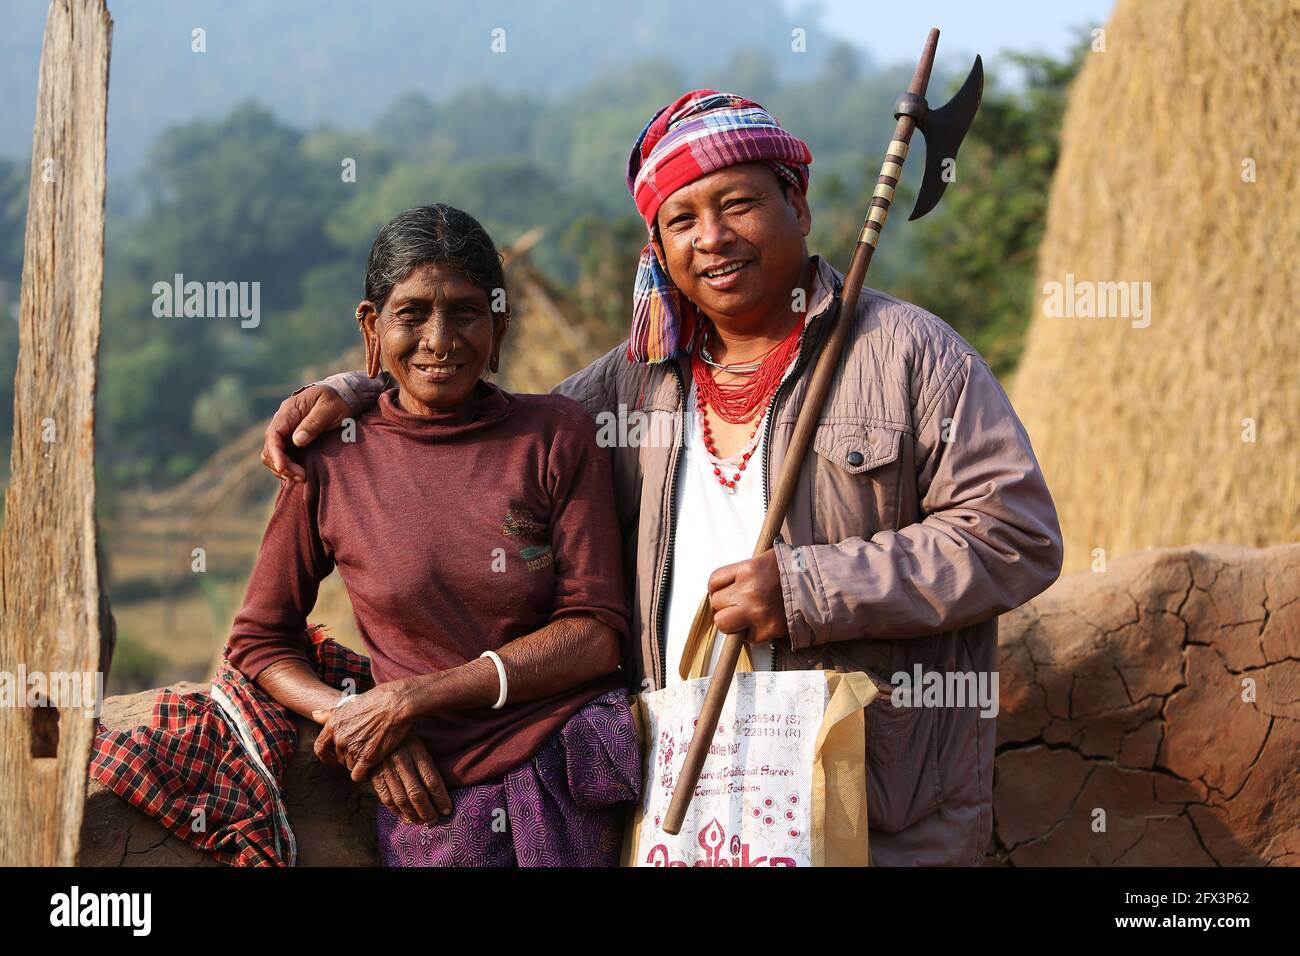 LANJIA SAORA TRIBE - Lanjia Saora tribal brother and sister posing for camera. This picture was clicked in Puttasingh tribal village,  Odisha, India Stock Photo